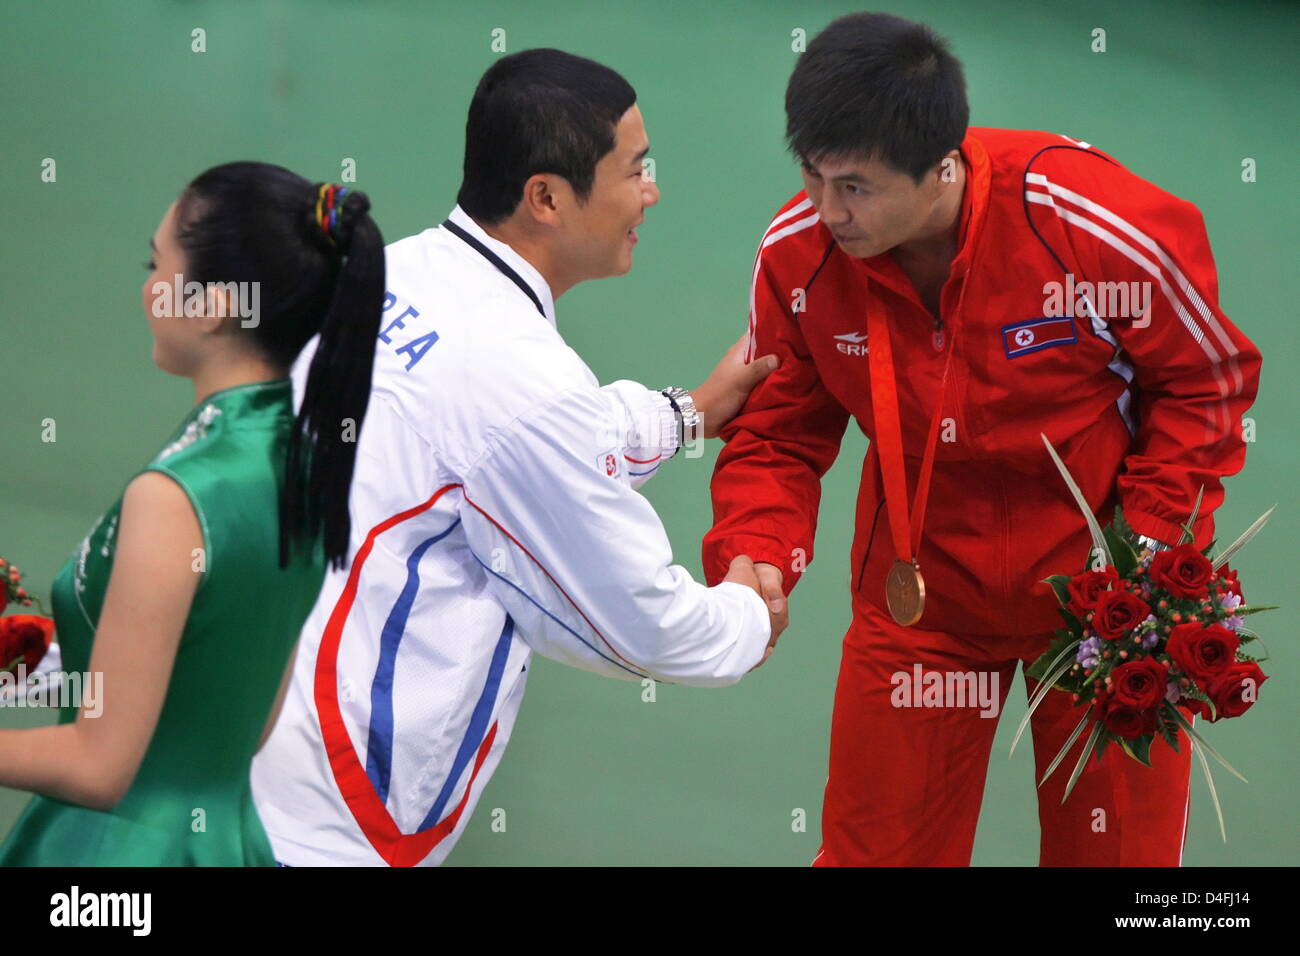 Silver medal winner Jong Oh Jin (C) from South Korea congratulates bronze medallist Jong Su Kim (R) from North Korea during the medal ceremony in the men`s 10m air pistol qualification in the Beijing Shooting Range Hall at the Beijing 2008 Olympic Games, Beijing, China, 09 August 2008. Photo: Jens Buettner dpa (c) dpa - Bildfunk Stock Photo